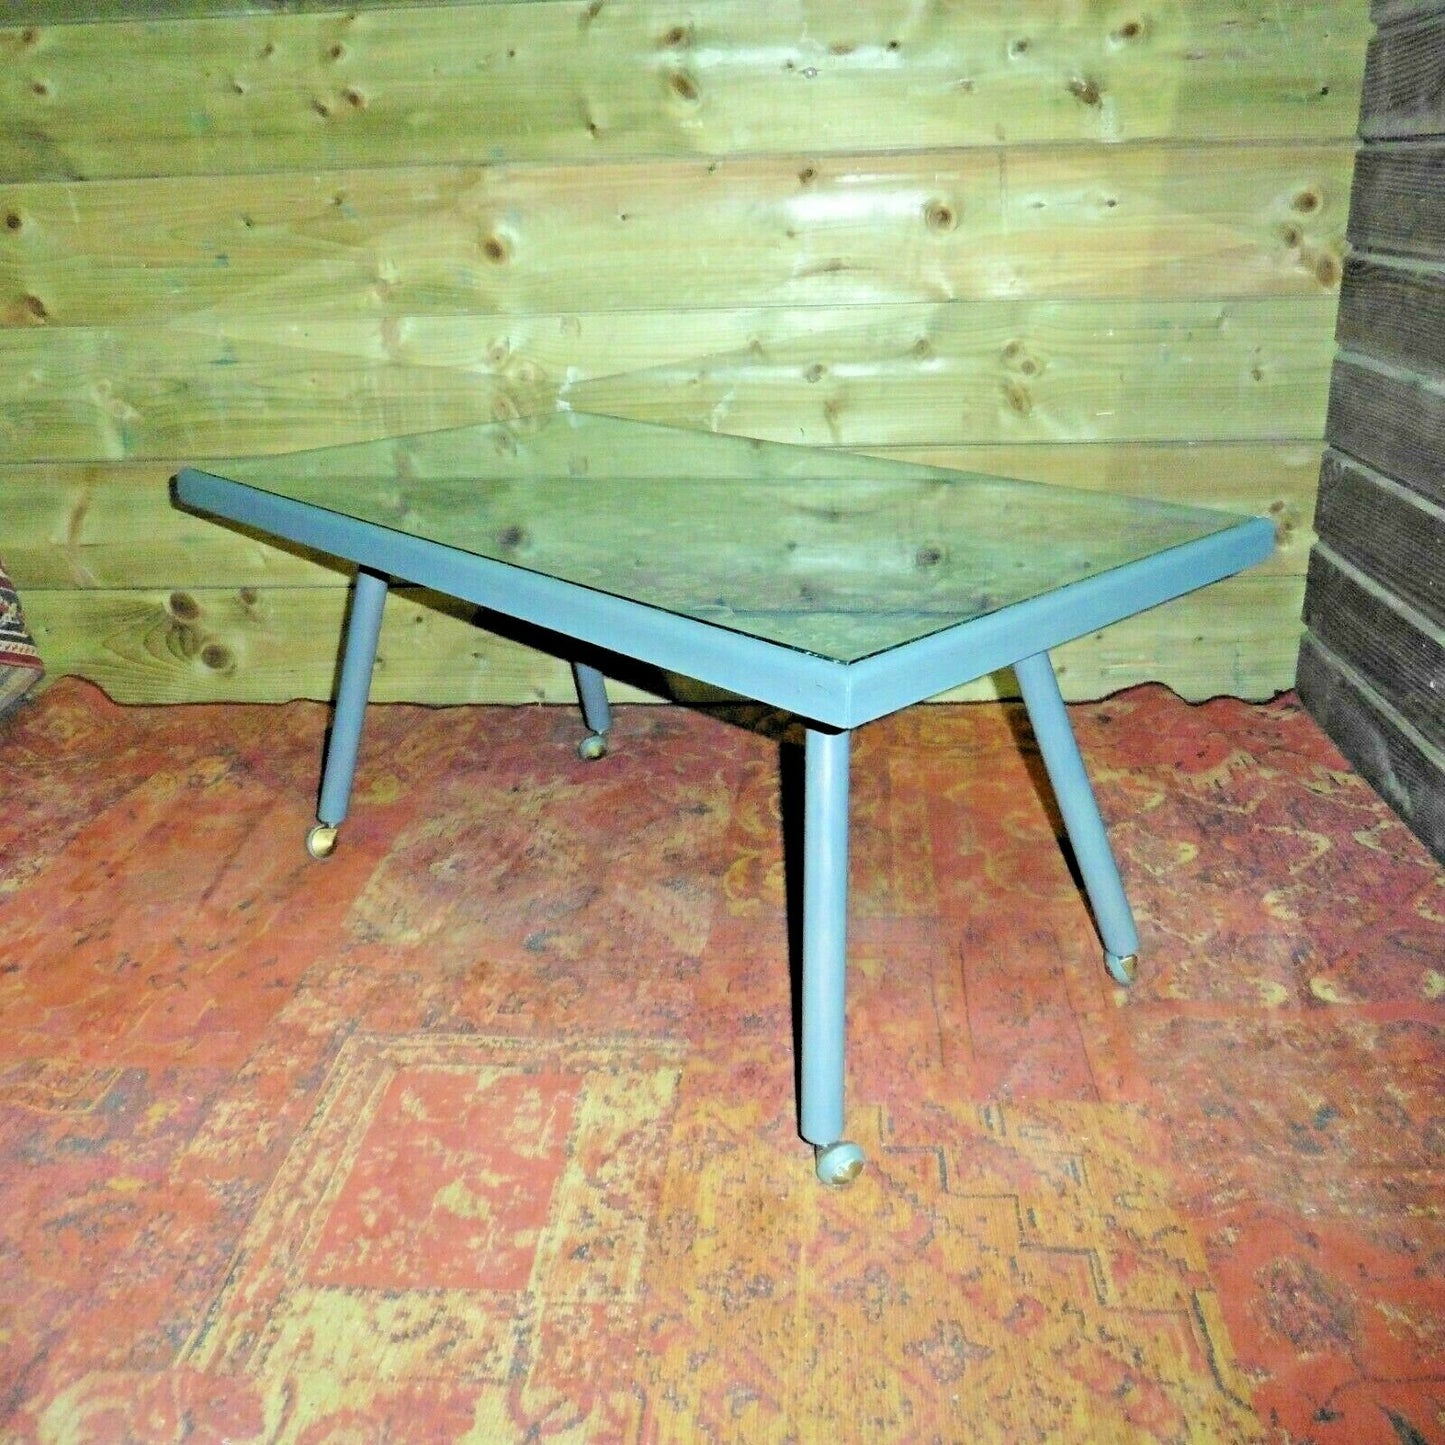 409.....Lovely Upcycled Retro Coffee Table / Mid Century Modern Coffee Table